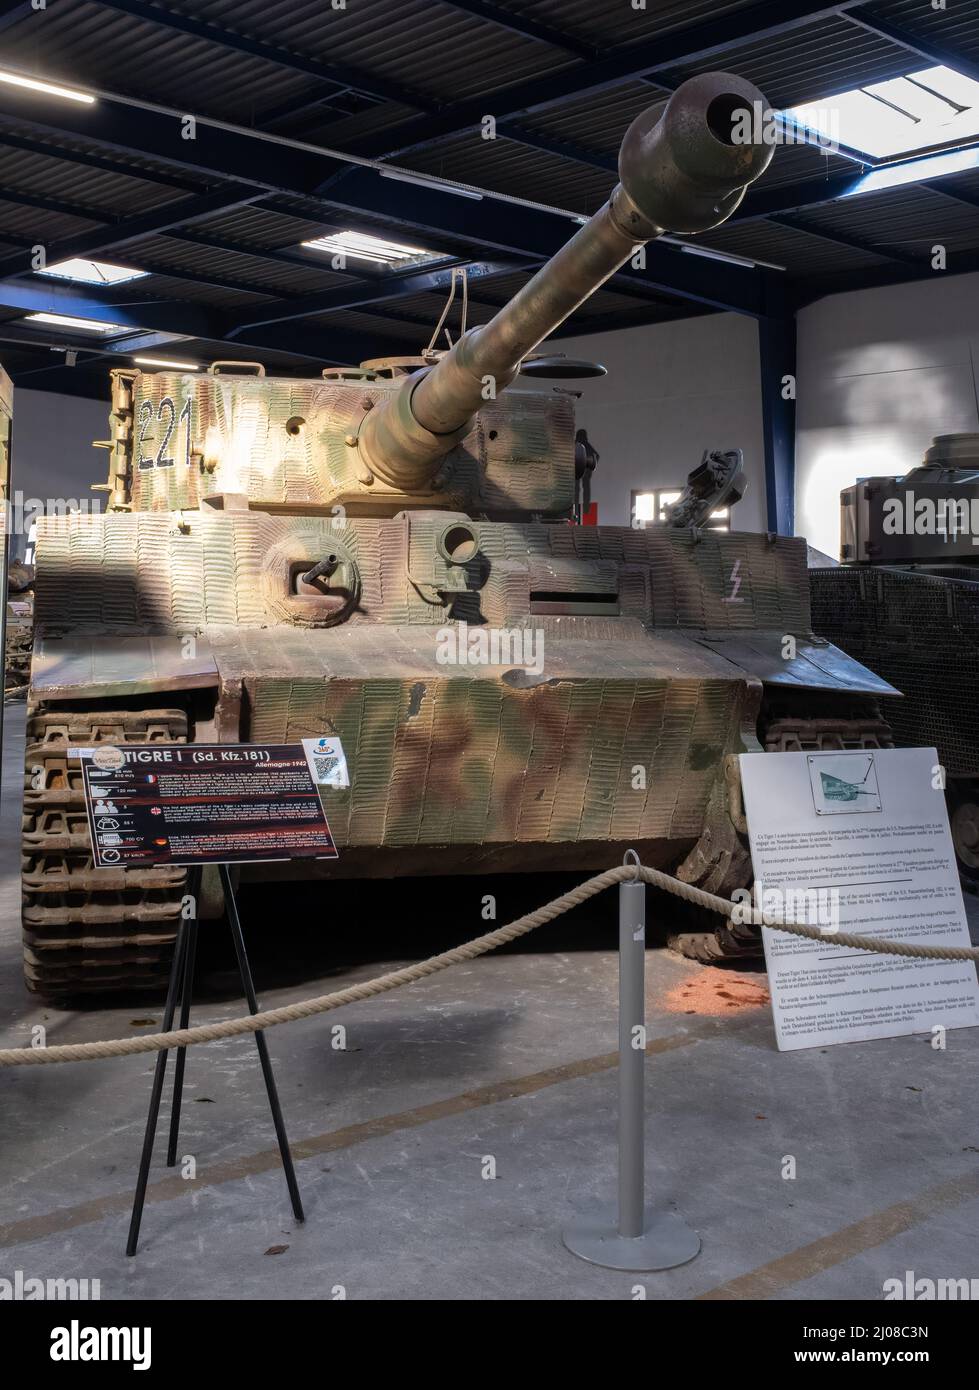 Saumur, France - February 26, 2022:  German Tiger I (Panzer VI Sd. Kfz. 181). Tank museum in Saumur (Musee des Blindes). Second world war exhibition. Stock Photo